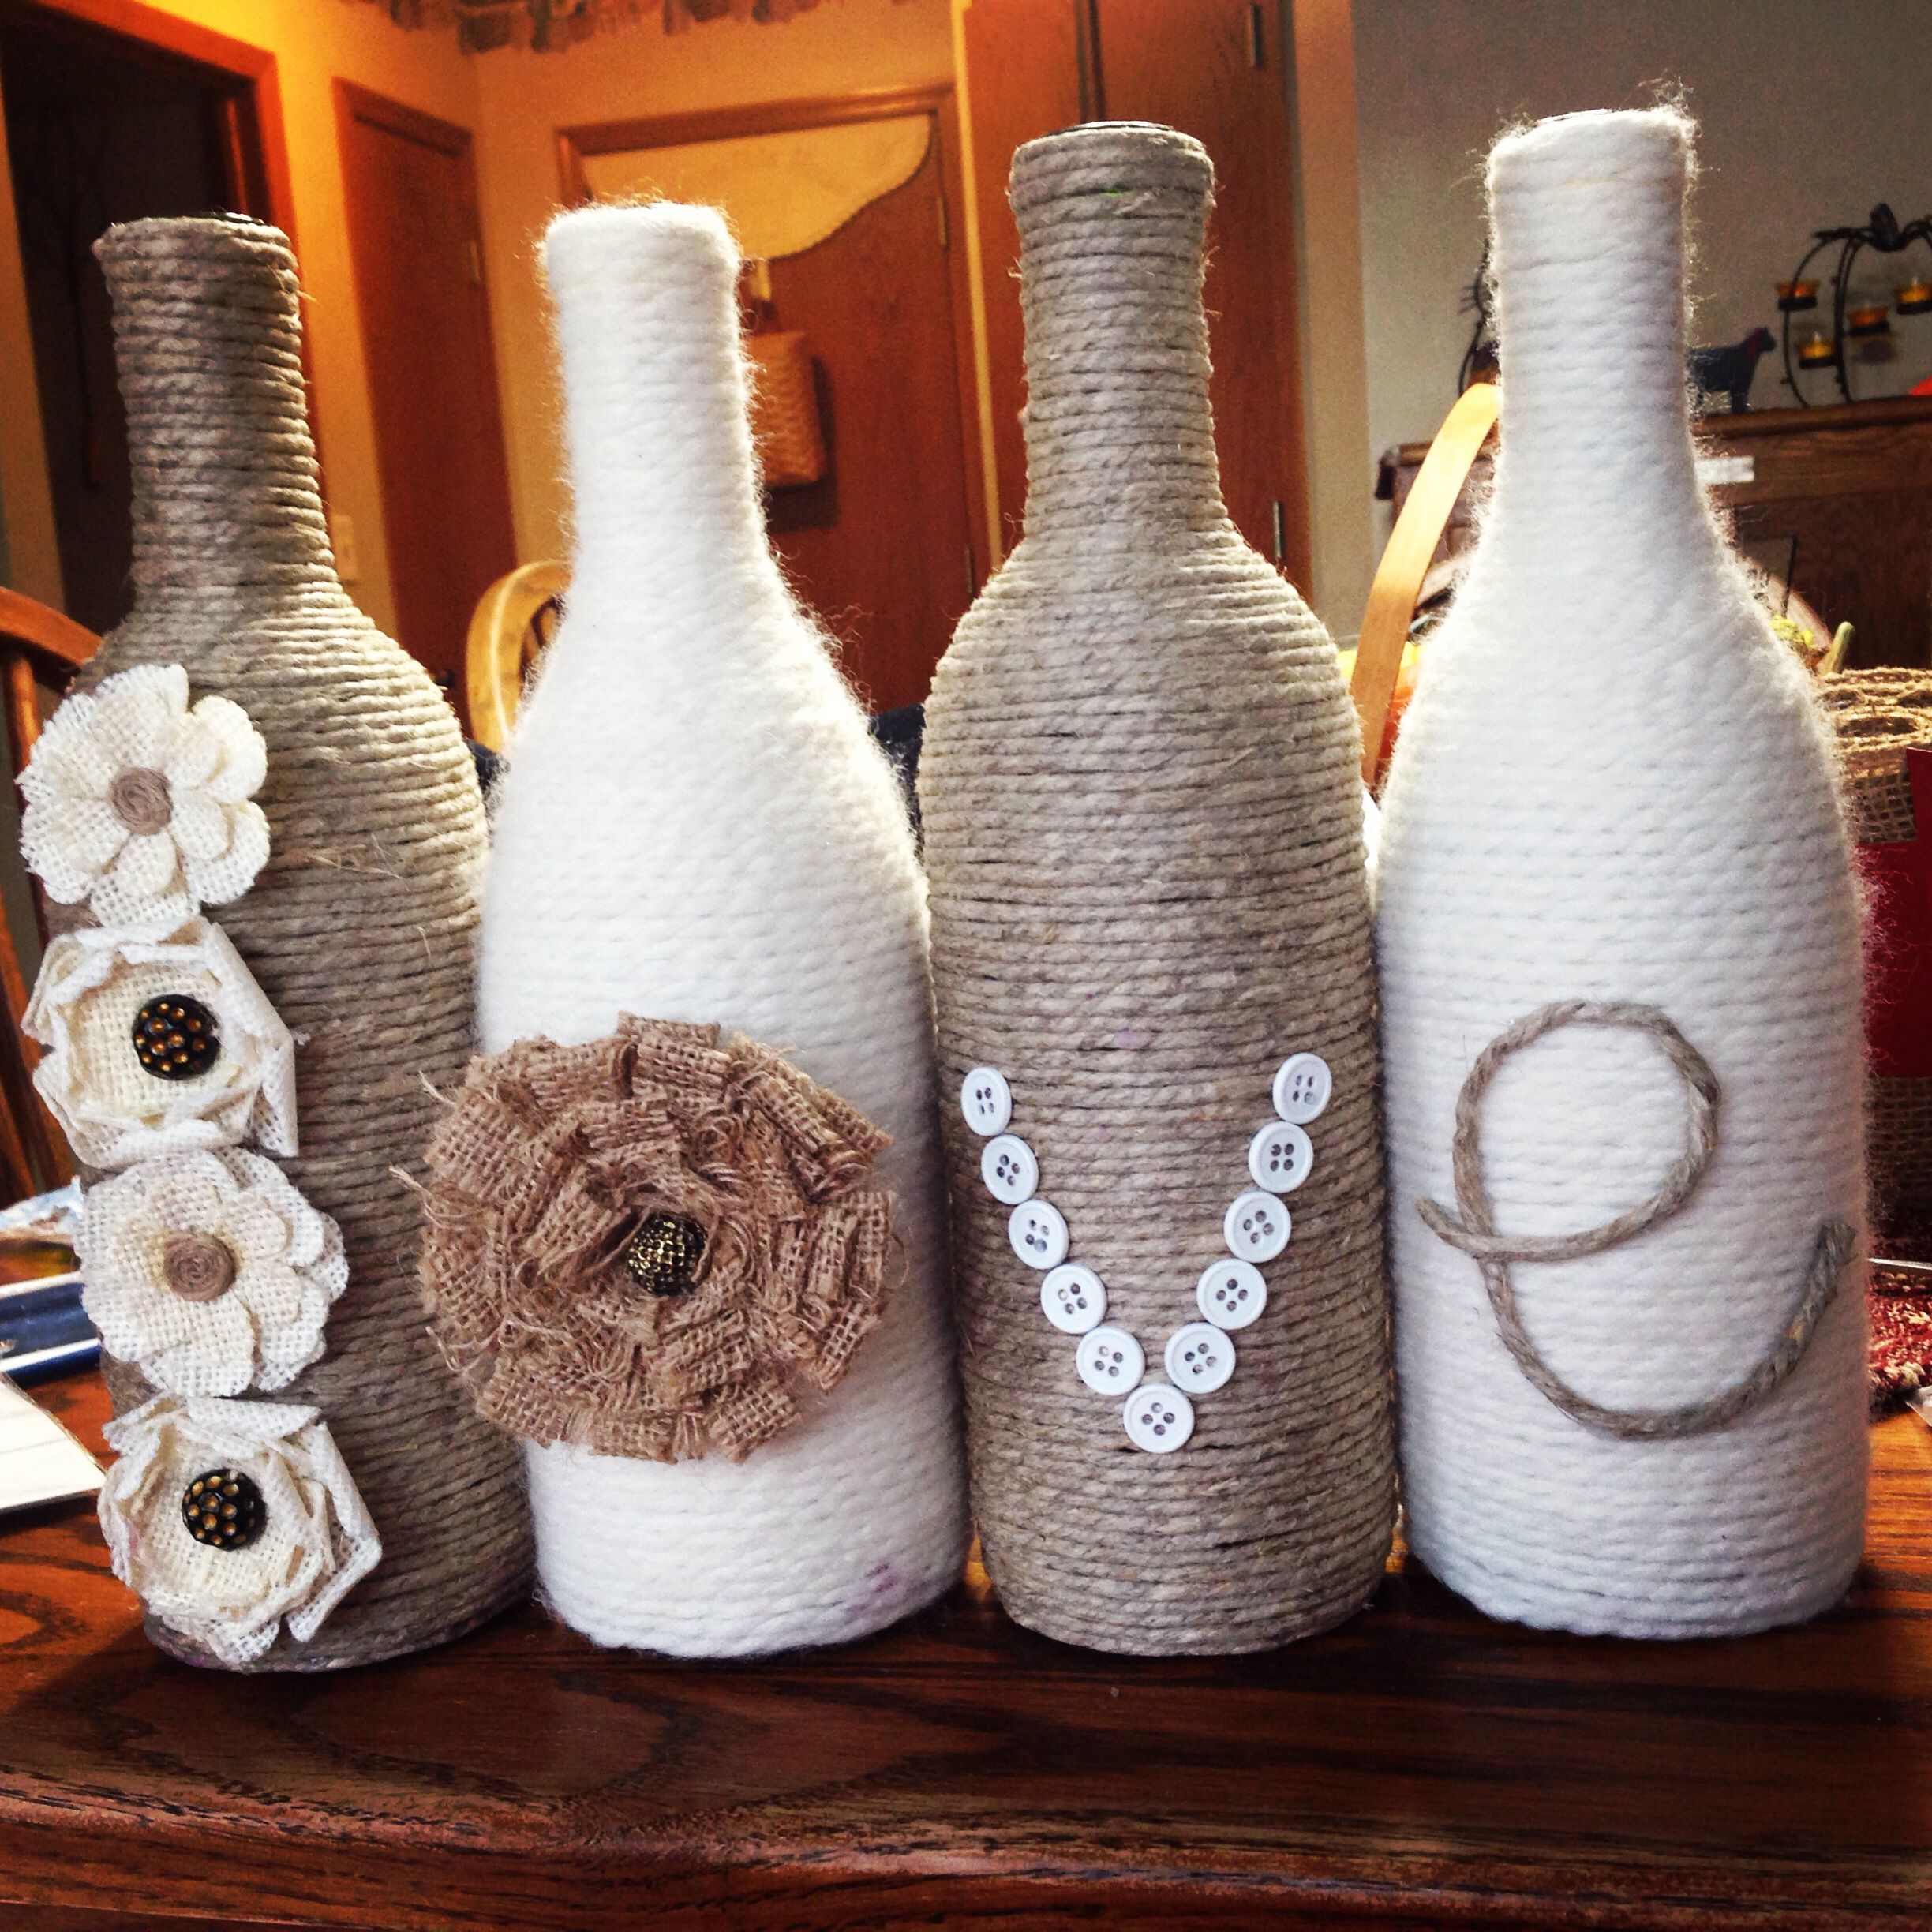 Love' wine bottle set. Twine and yarn wrapped wine bottles for a ...